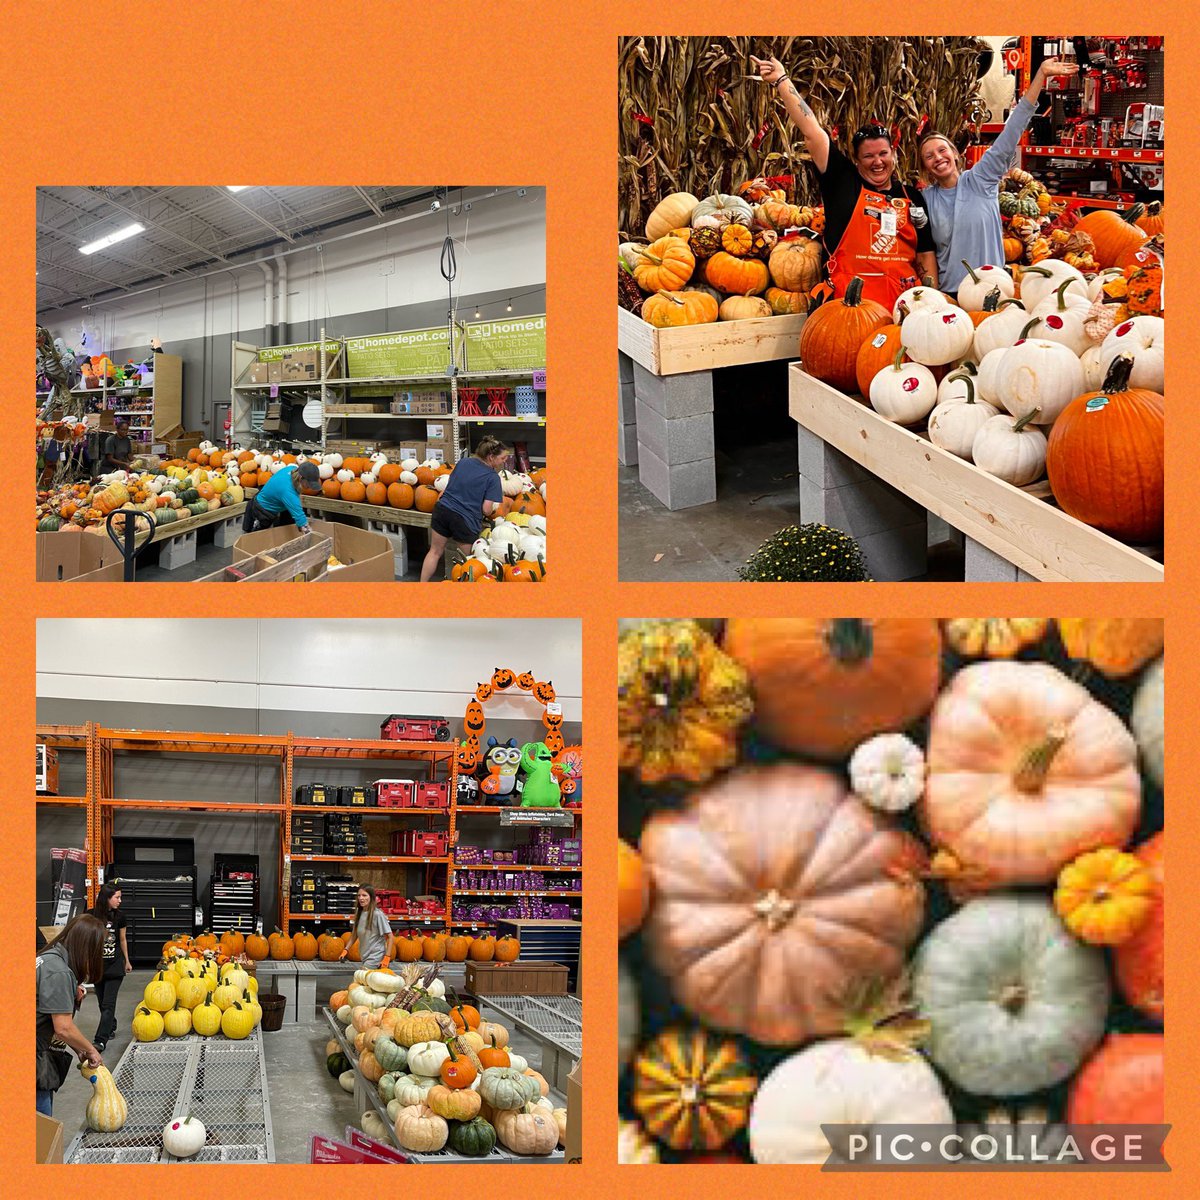 What a great way to kick off fall in Austin 2023. Huge thank you to all at Home Depot for your support and partnerships during these builds and deliveries. @StinchcombAssoc Austin team out did themselves. Thank you all